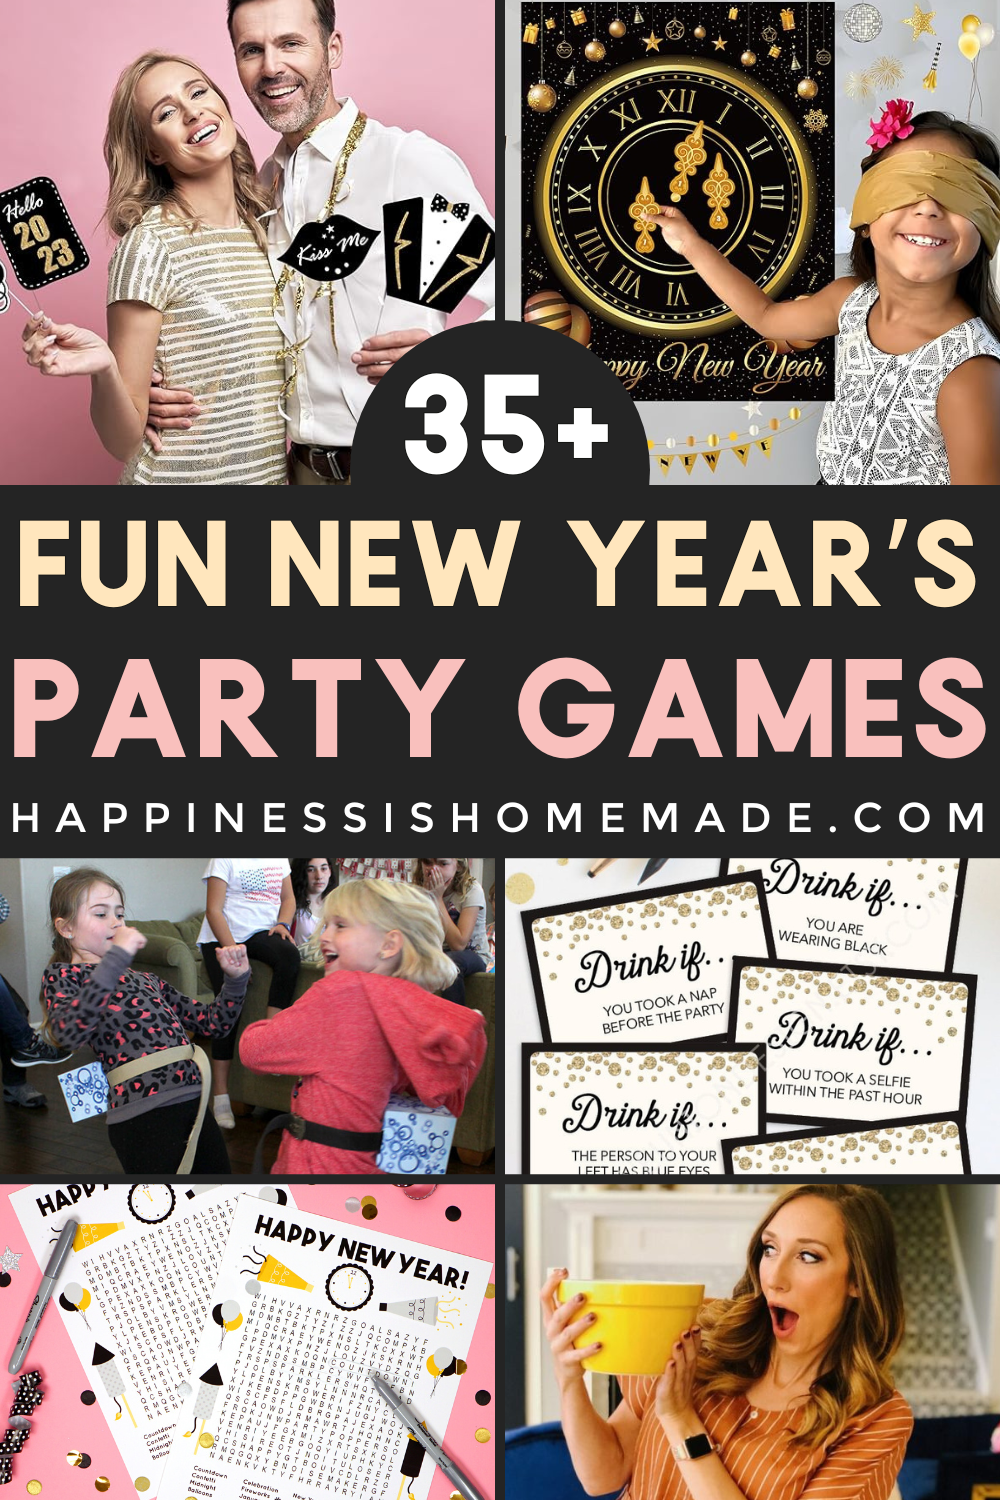 10 Best Family Games for Your New Year's Eve Party